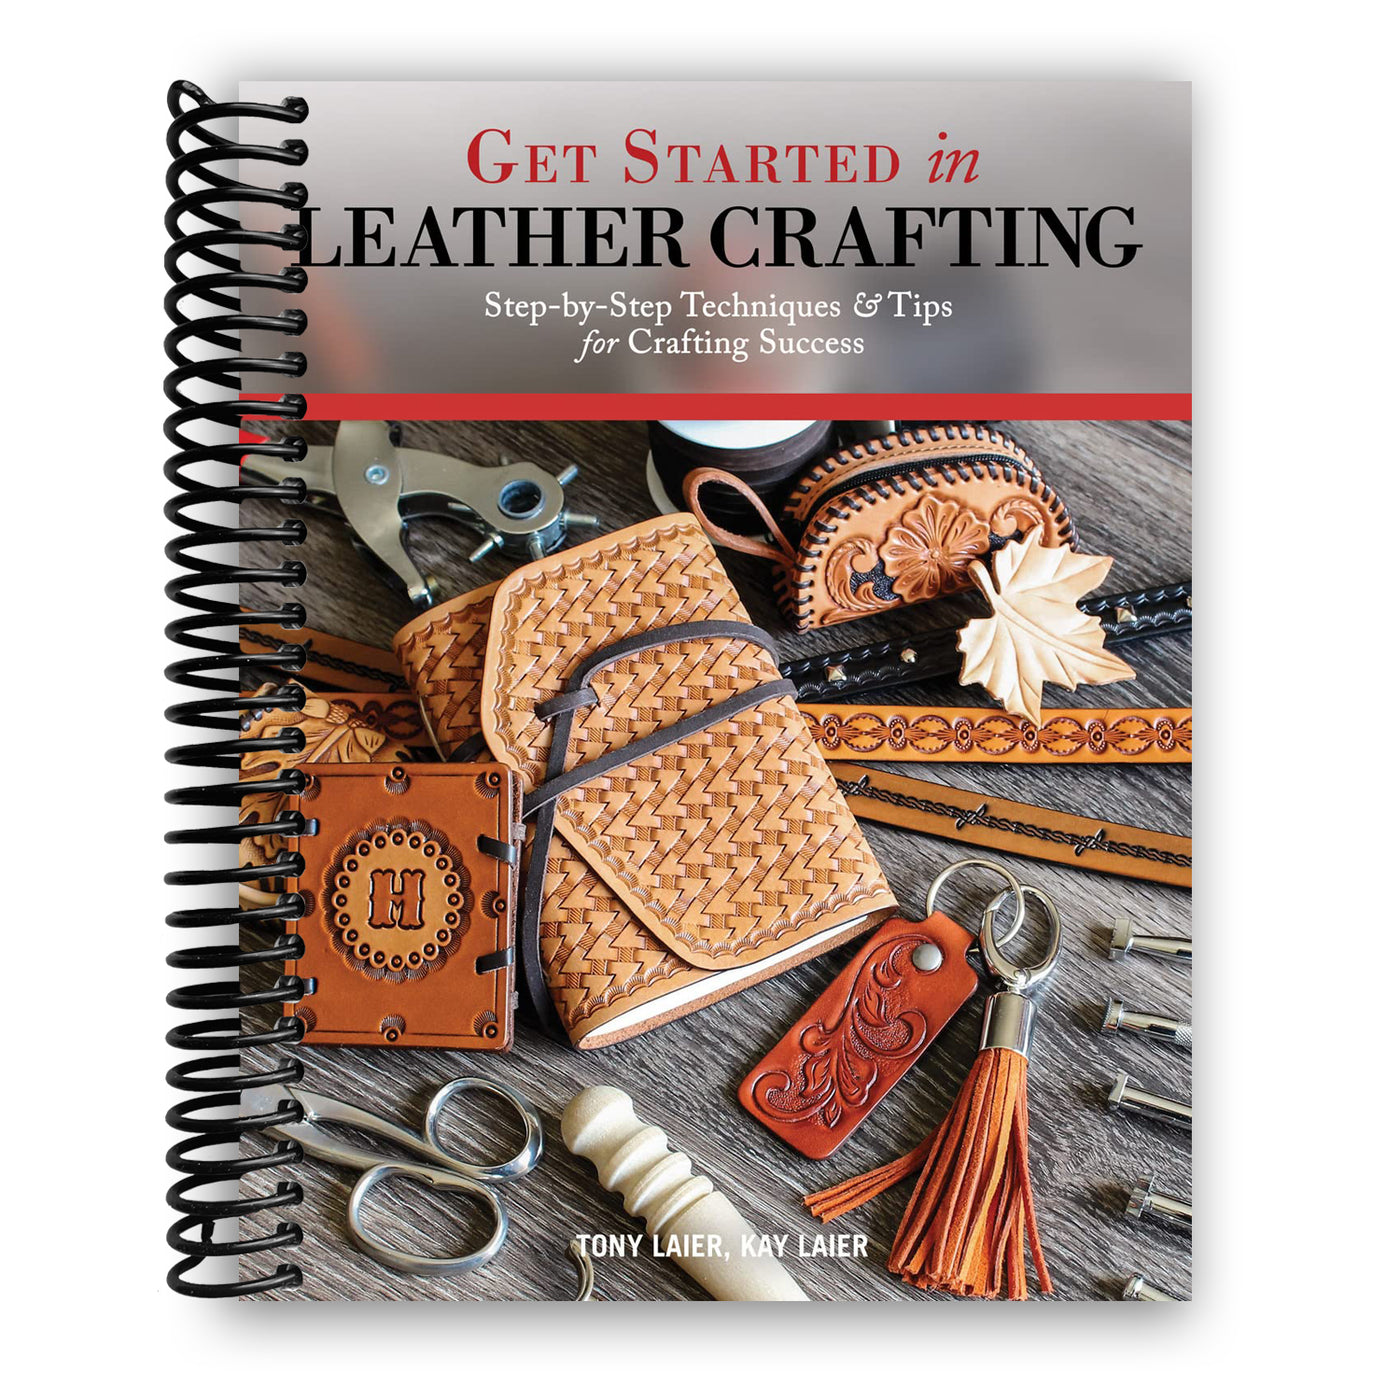 Get Started in Leather Crafting: Step-by-Step Techniques and Tips for Crafting Success (Spiral Bound)